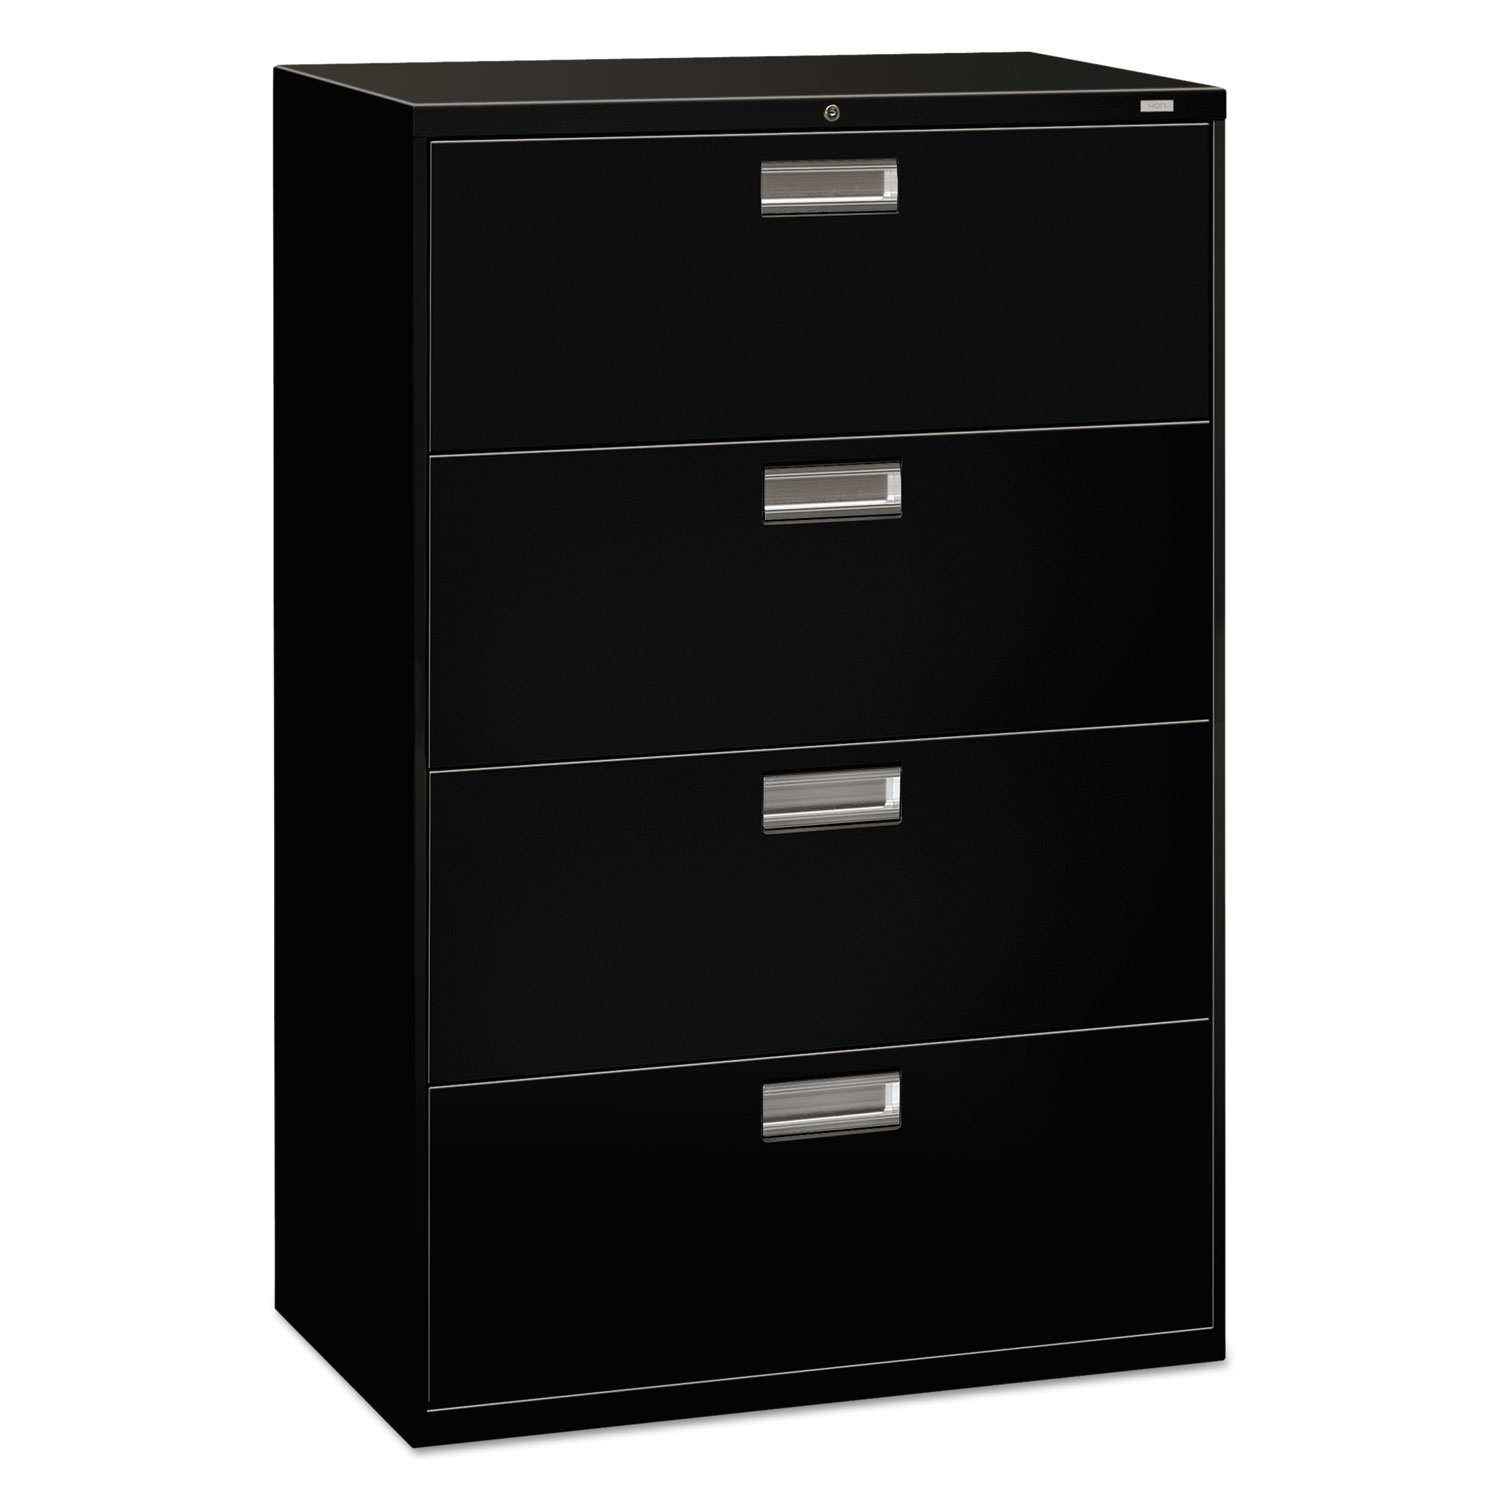 600 Series Four-Drawer Lateral File, 36w x 19-1/4d, Black